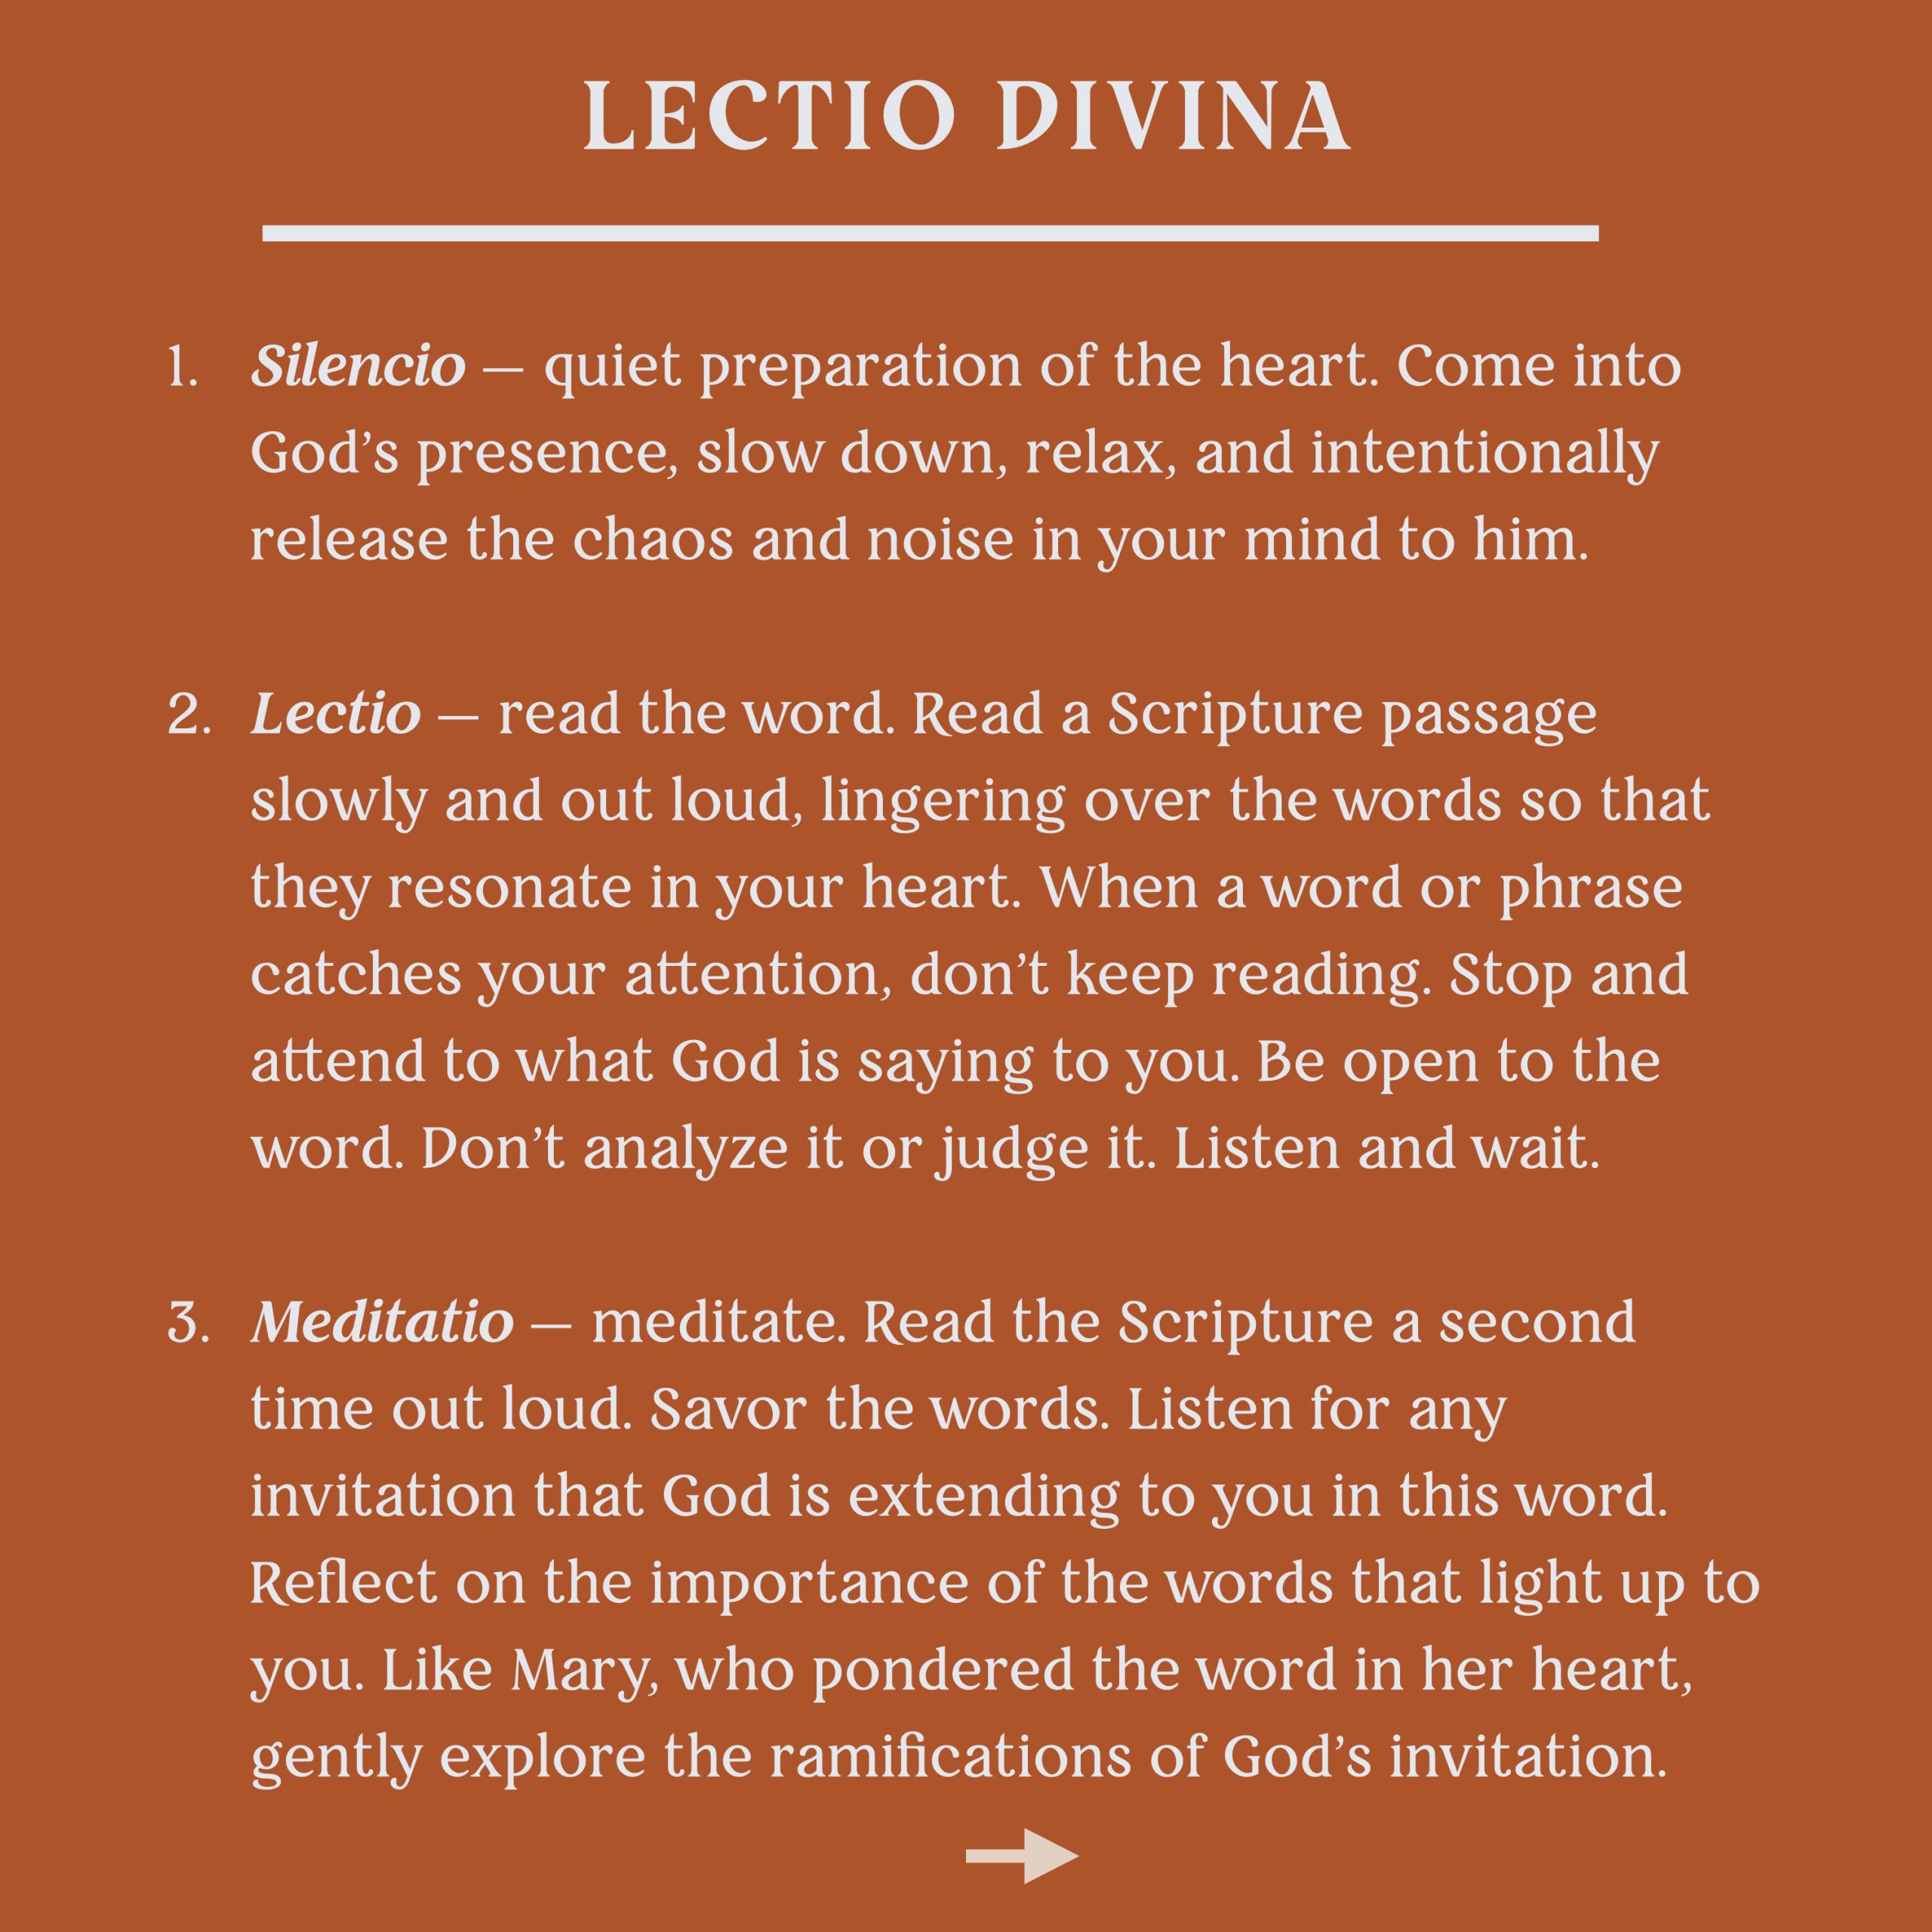 Lectio Divina
1. Silencio - quiet preparation of the heart. Come into God's presence, slow down, relax, and intentionally release the chaos and noise in your mind to him.
2. Lectio- read the word. Read a Scripture passage slowly and out loud, lingering over the words so that they resonate in your heart. When a word or phrase catches your attention, don't keep reading. Stop and attend to what God is saying to you. Be open to the word. Don't analyze it or judge it. Listen and waitn.
3. Meidatio - meditate. Read the Scripture a second time out loud. Savor the words. Listen for any invitation that God is extending to you in this word. Reflect on the importance of the words that light up to you. Like Mary, who pondered the word in her heart, gently explore the ramifications of God's invitation.